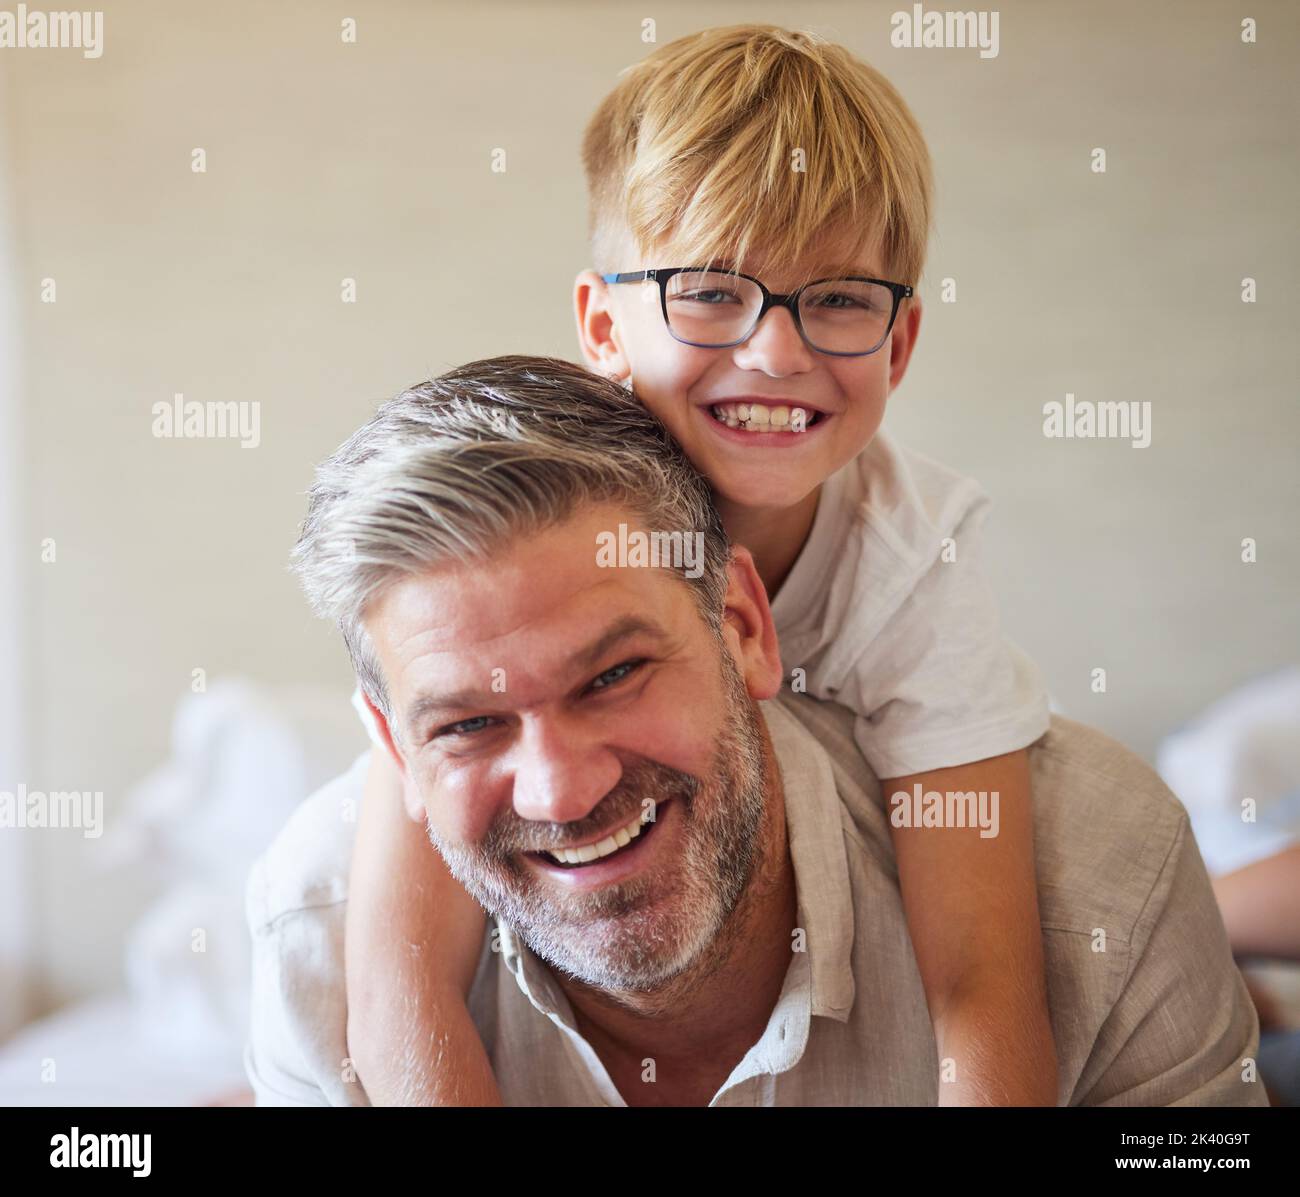 Family, children and love with a man and his child at home, laughing and having fun with a smile together. Kids, happy and smile with a cute boy and Stock Photo